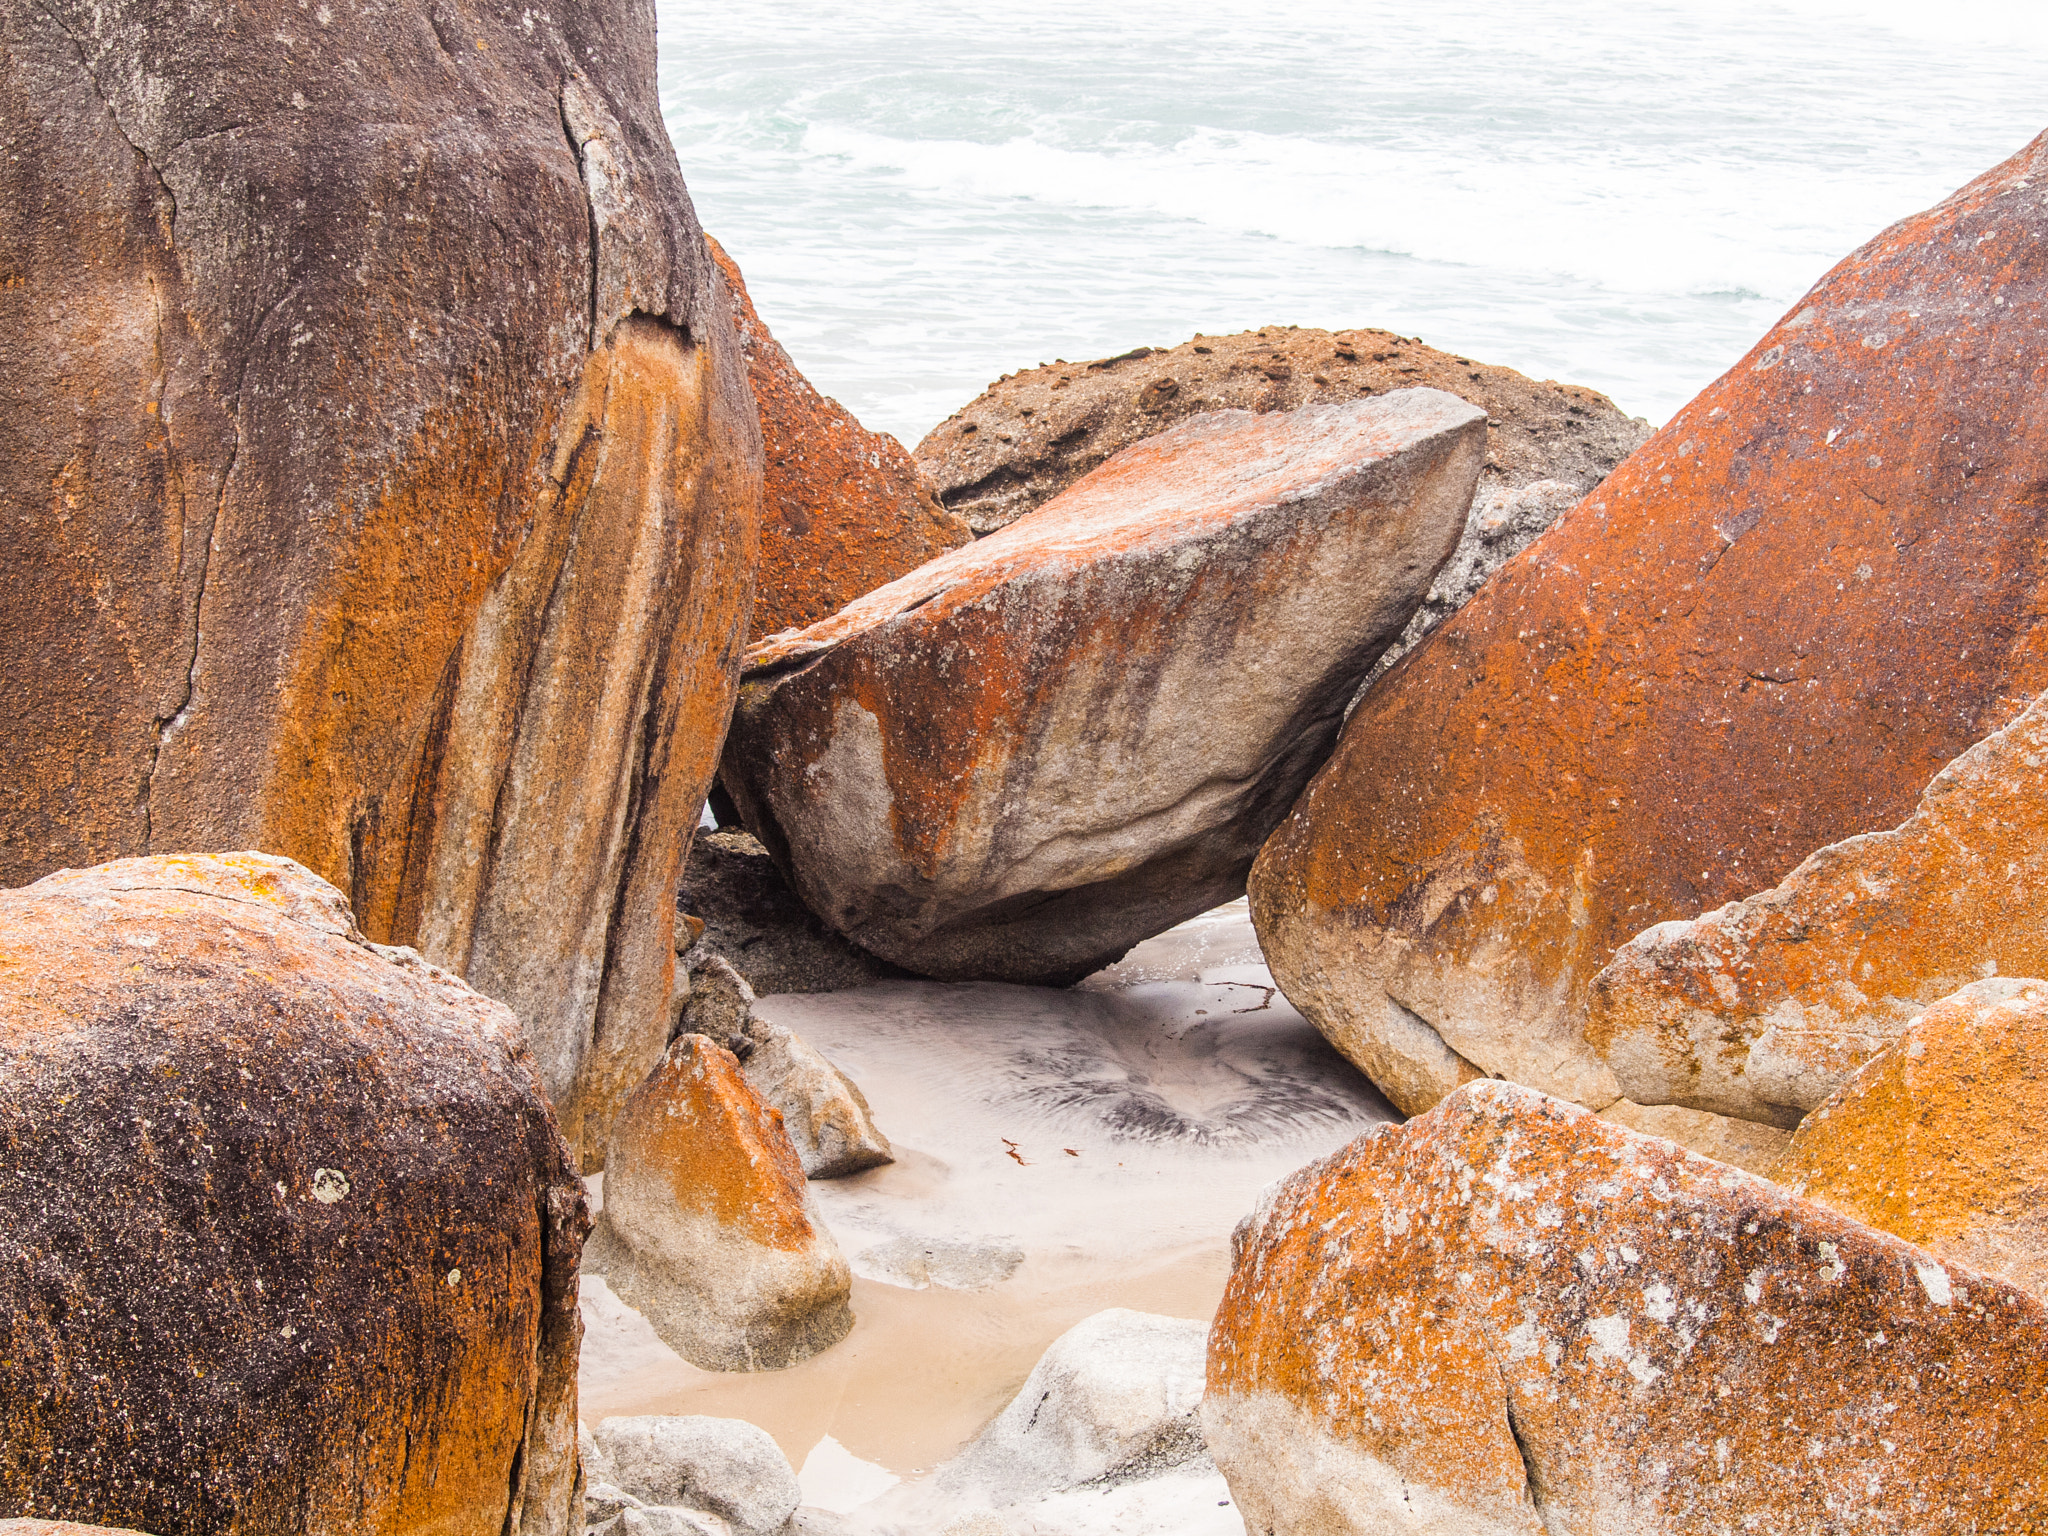 Olympus E-30 sample photo. Large rocks at the beach photography